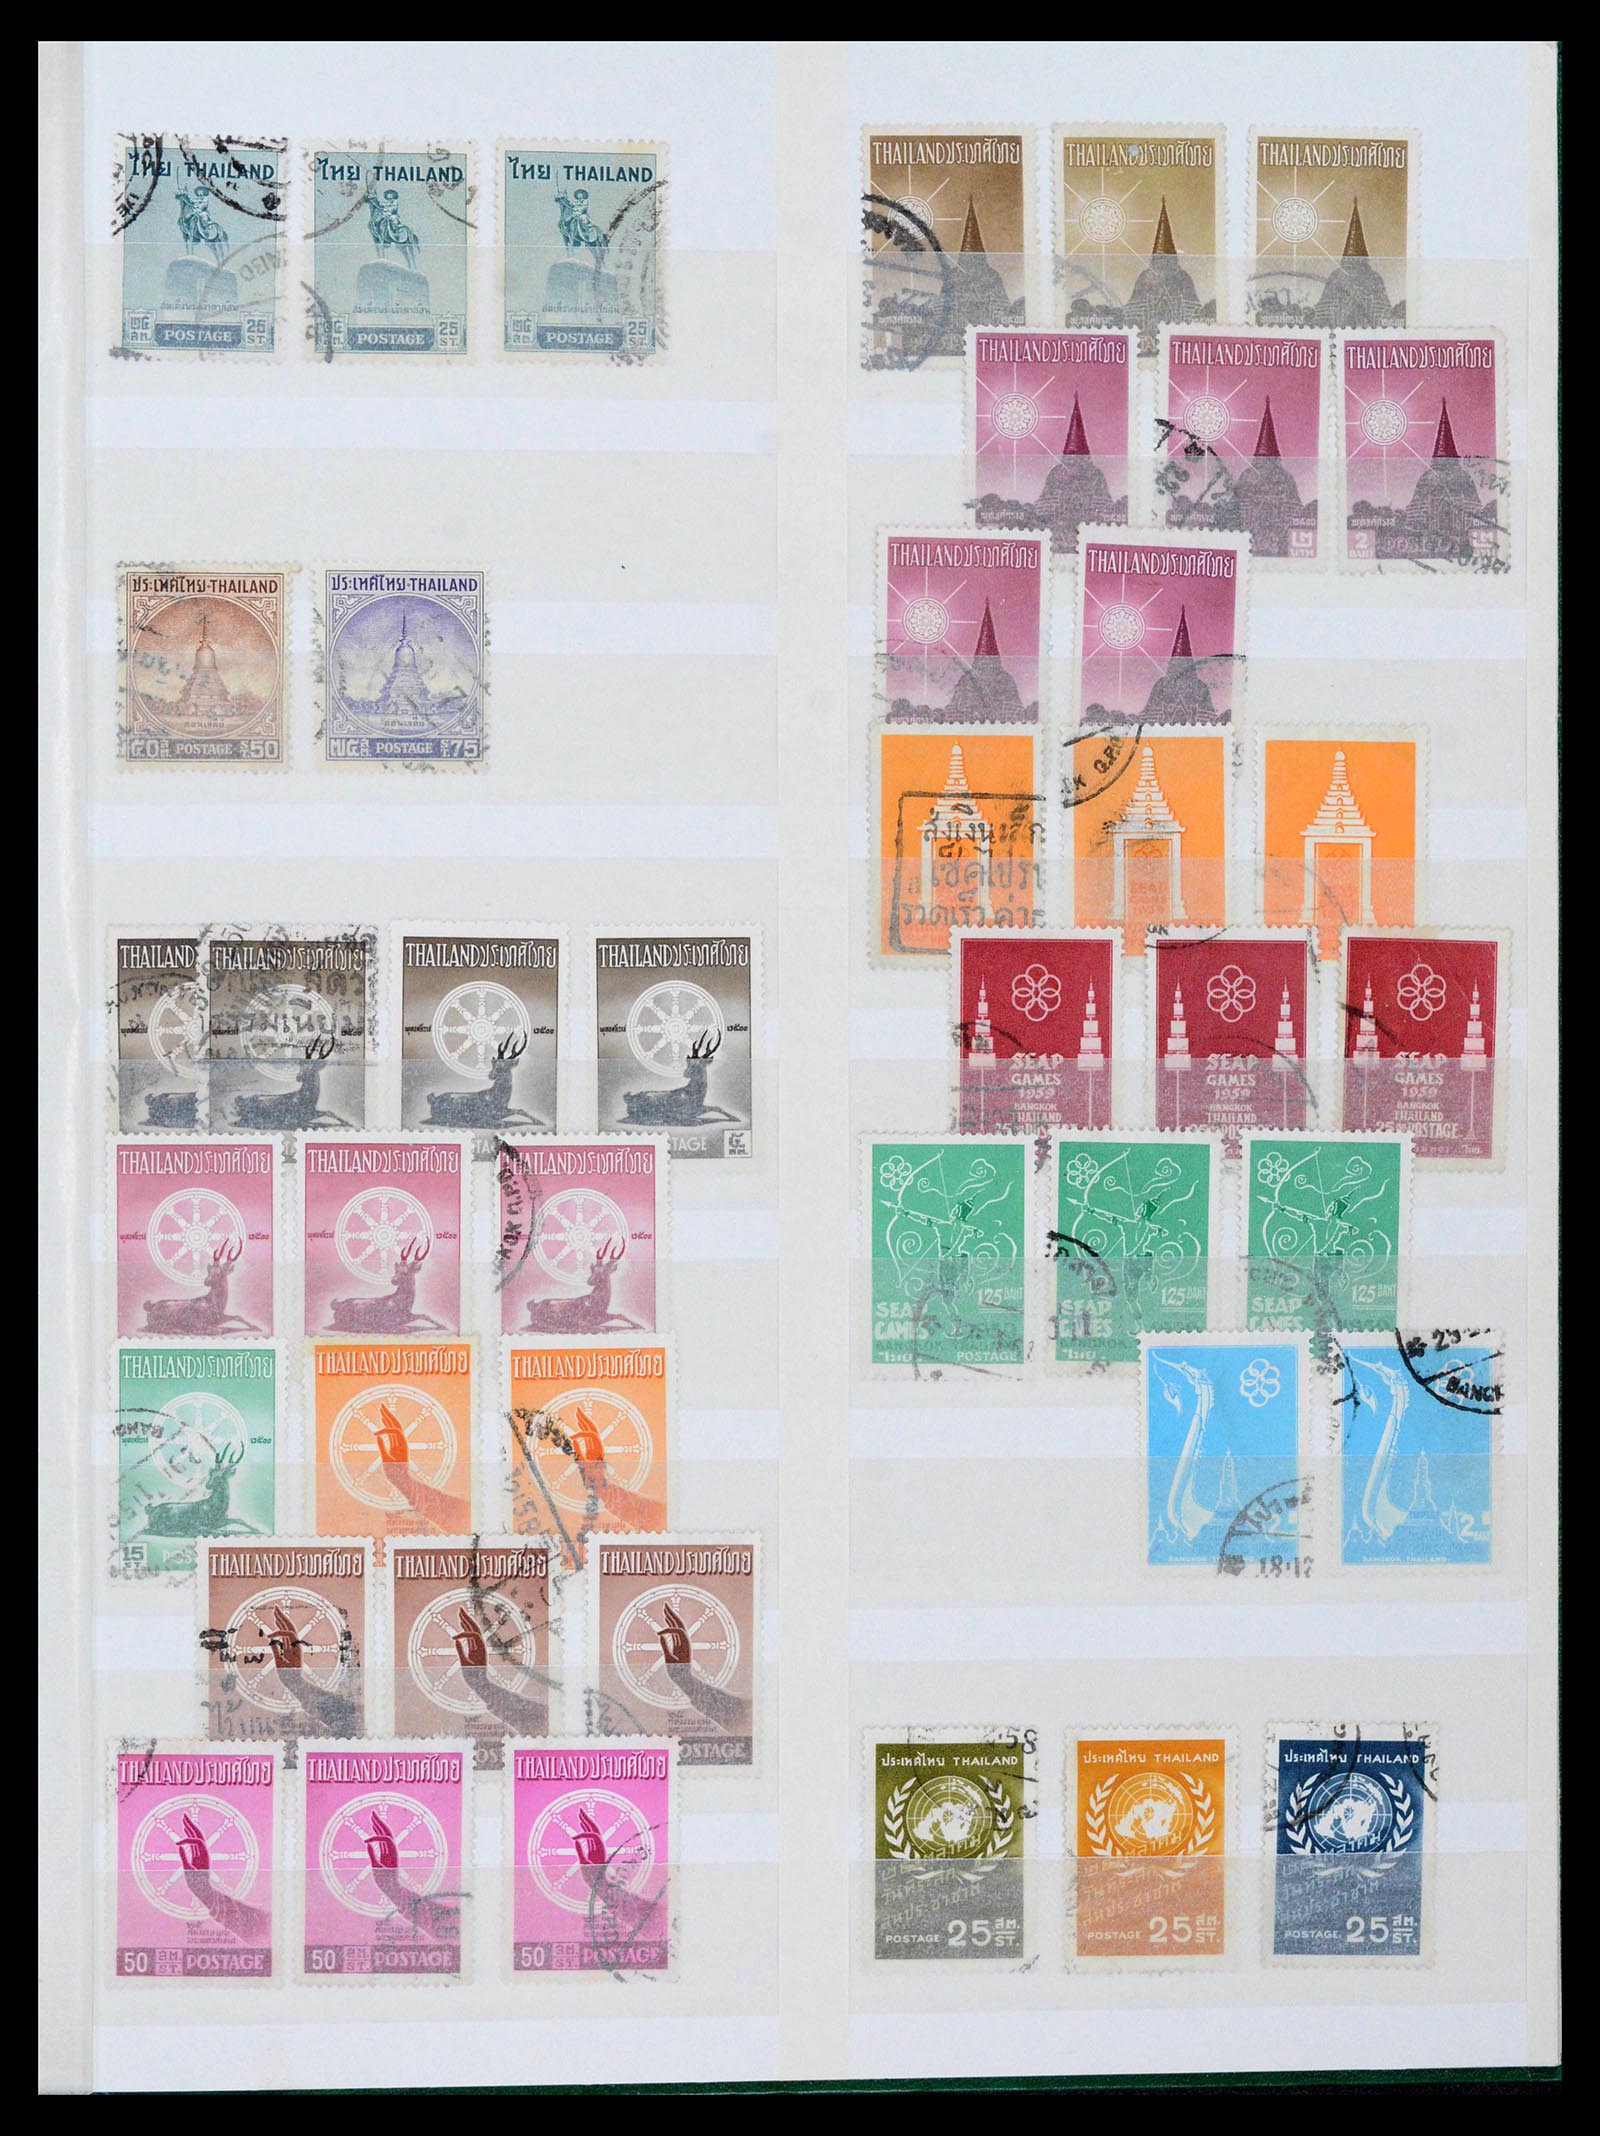 39384 0021 - Stamp collection 39384 Thailand 1883-2014.